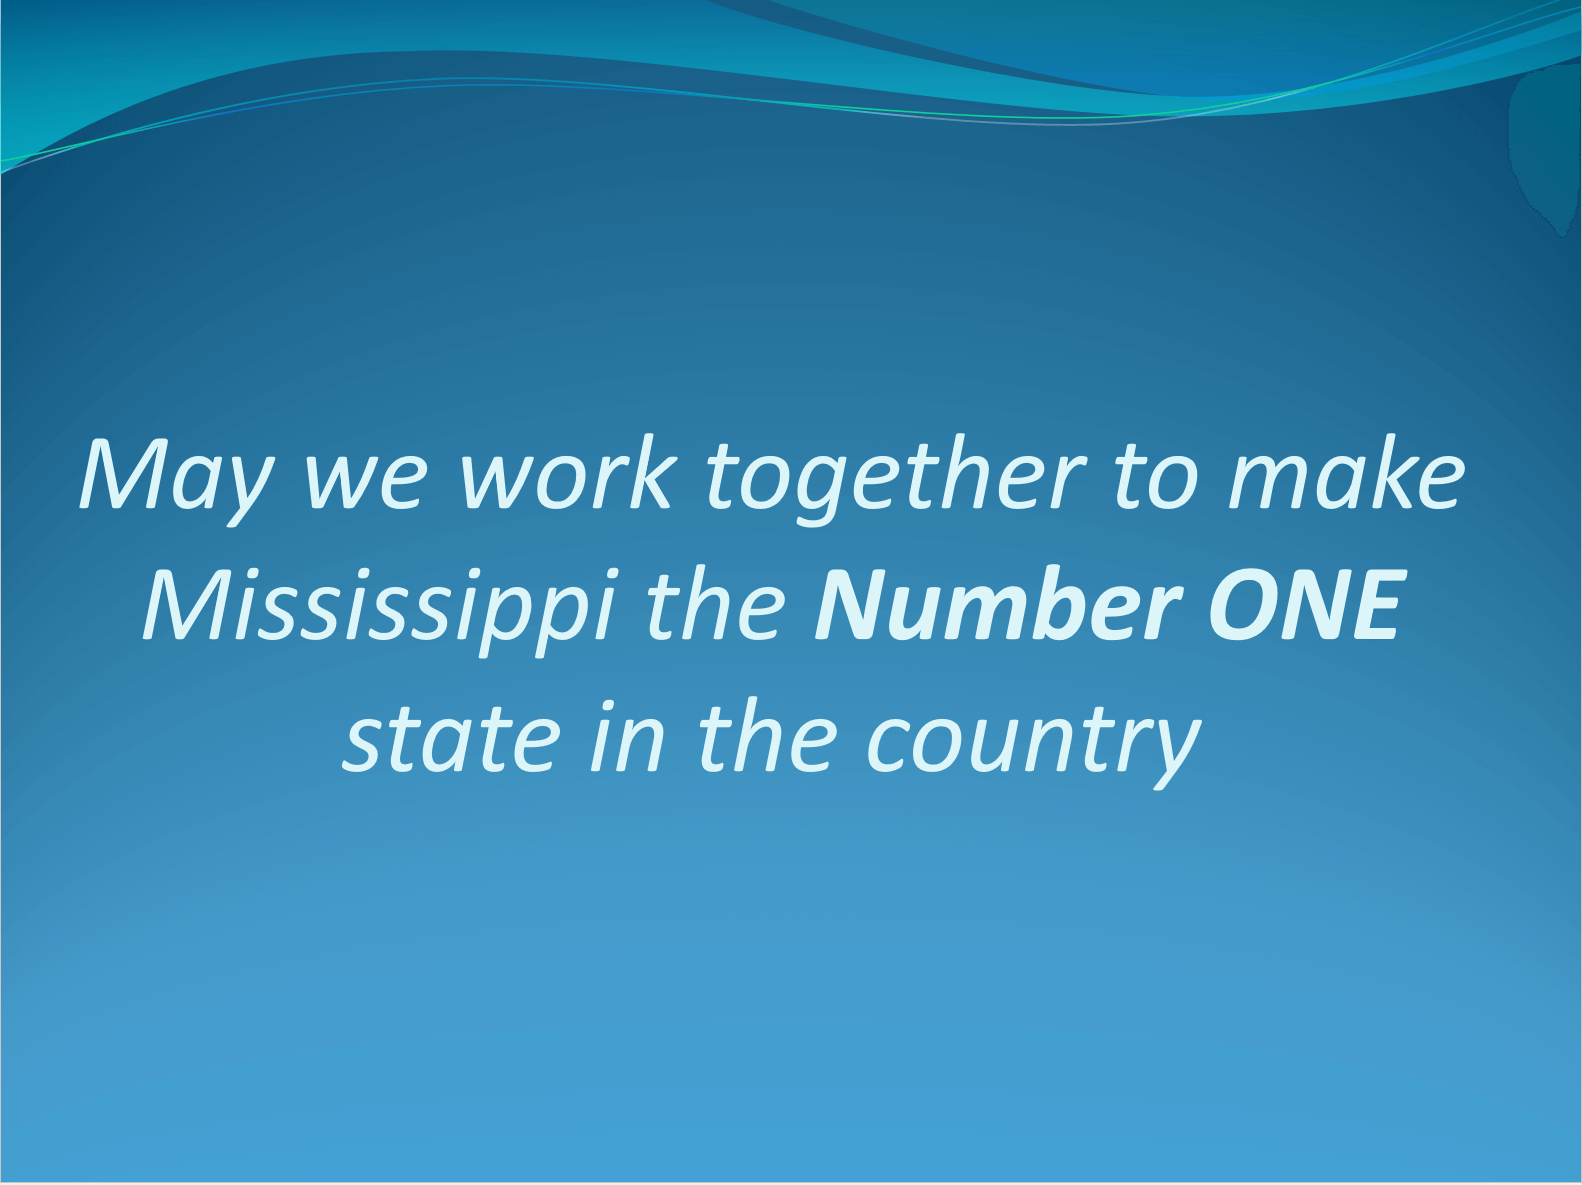 PowerPoint slide from Bilal Qizilbash's 2016 Innovate MS Talk with text saying ''may we work together to make Mississippi the Number ONE state in the country''.